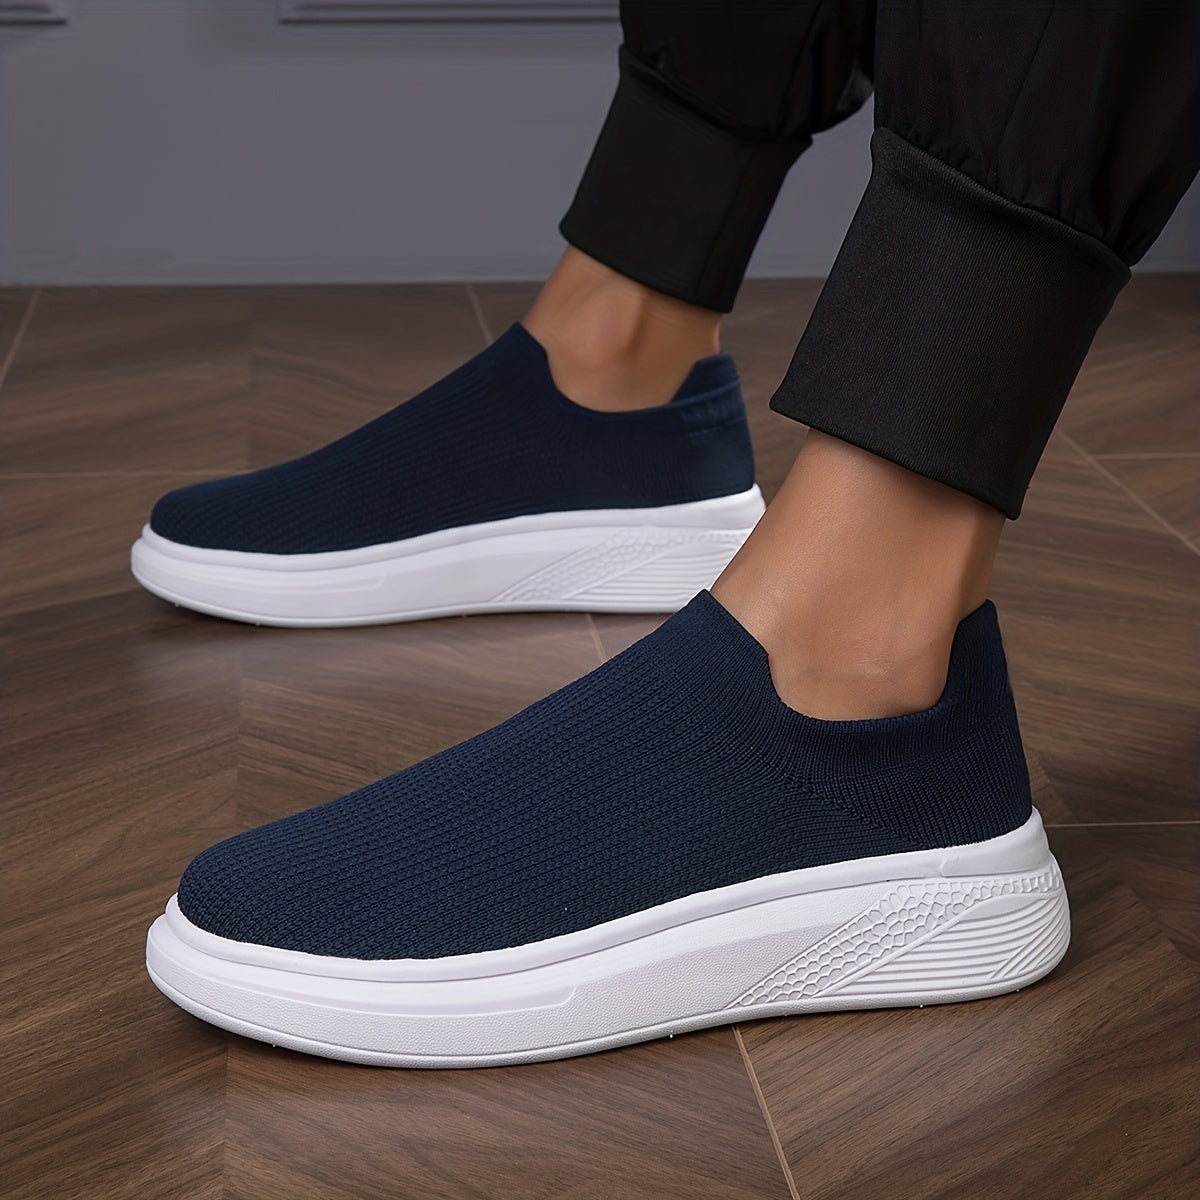 Men's Breathable Lightweight Slip-On Casual Shoes For Traveling Jogging, Spring And Summer